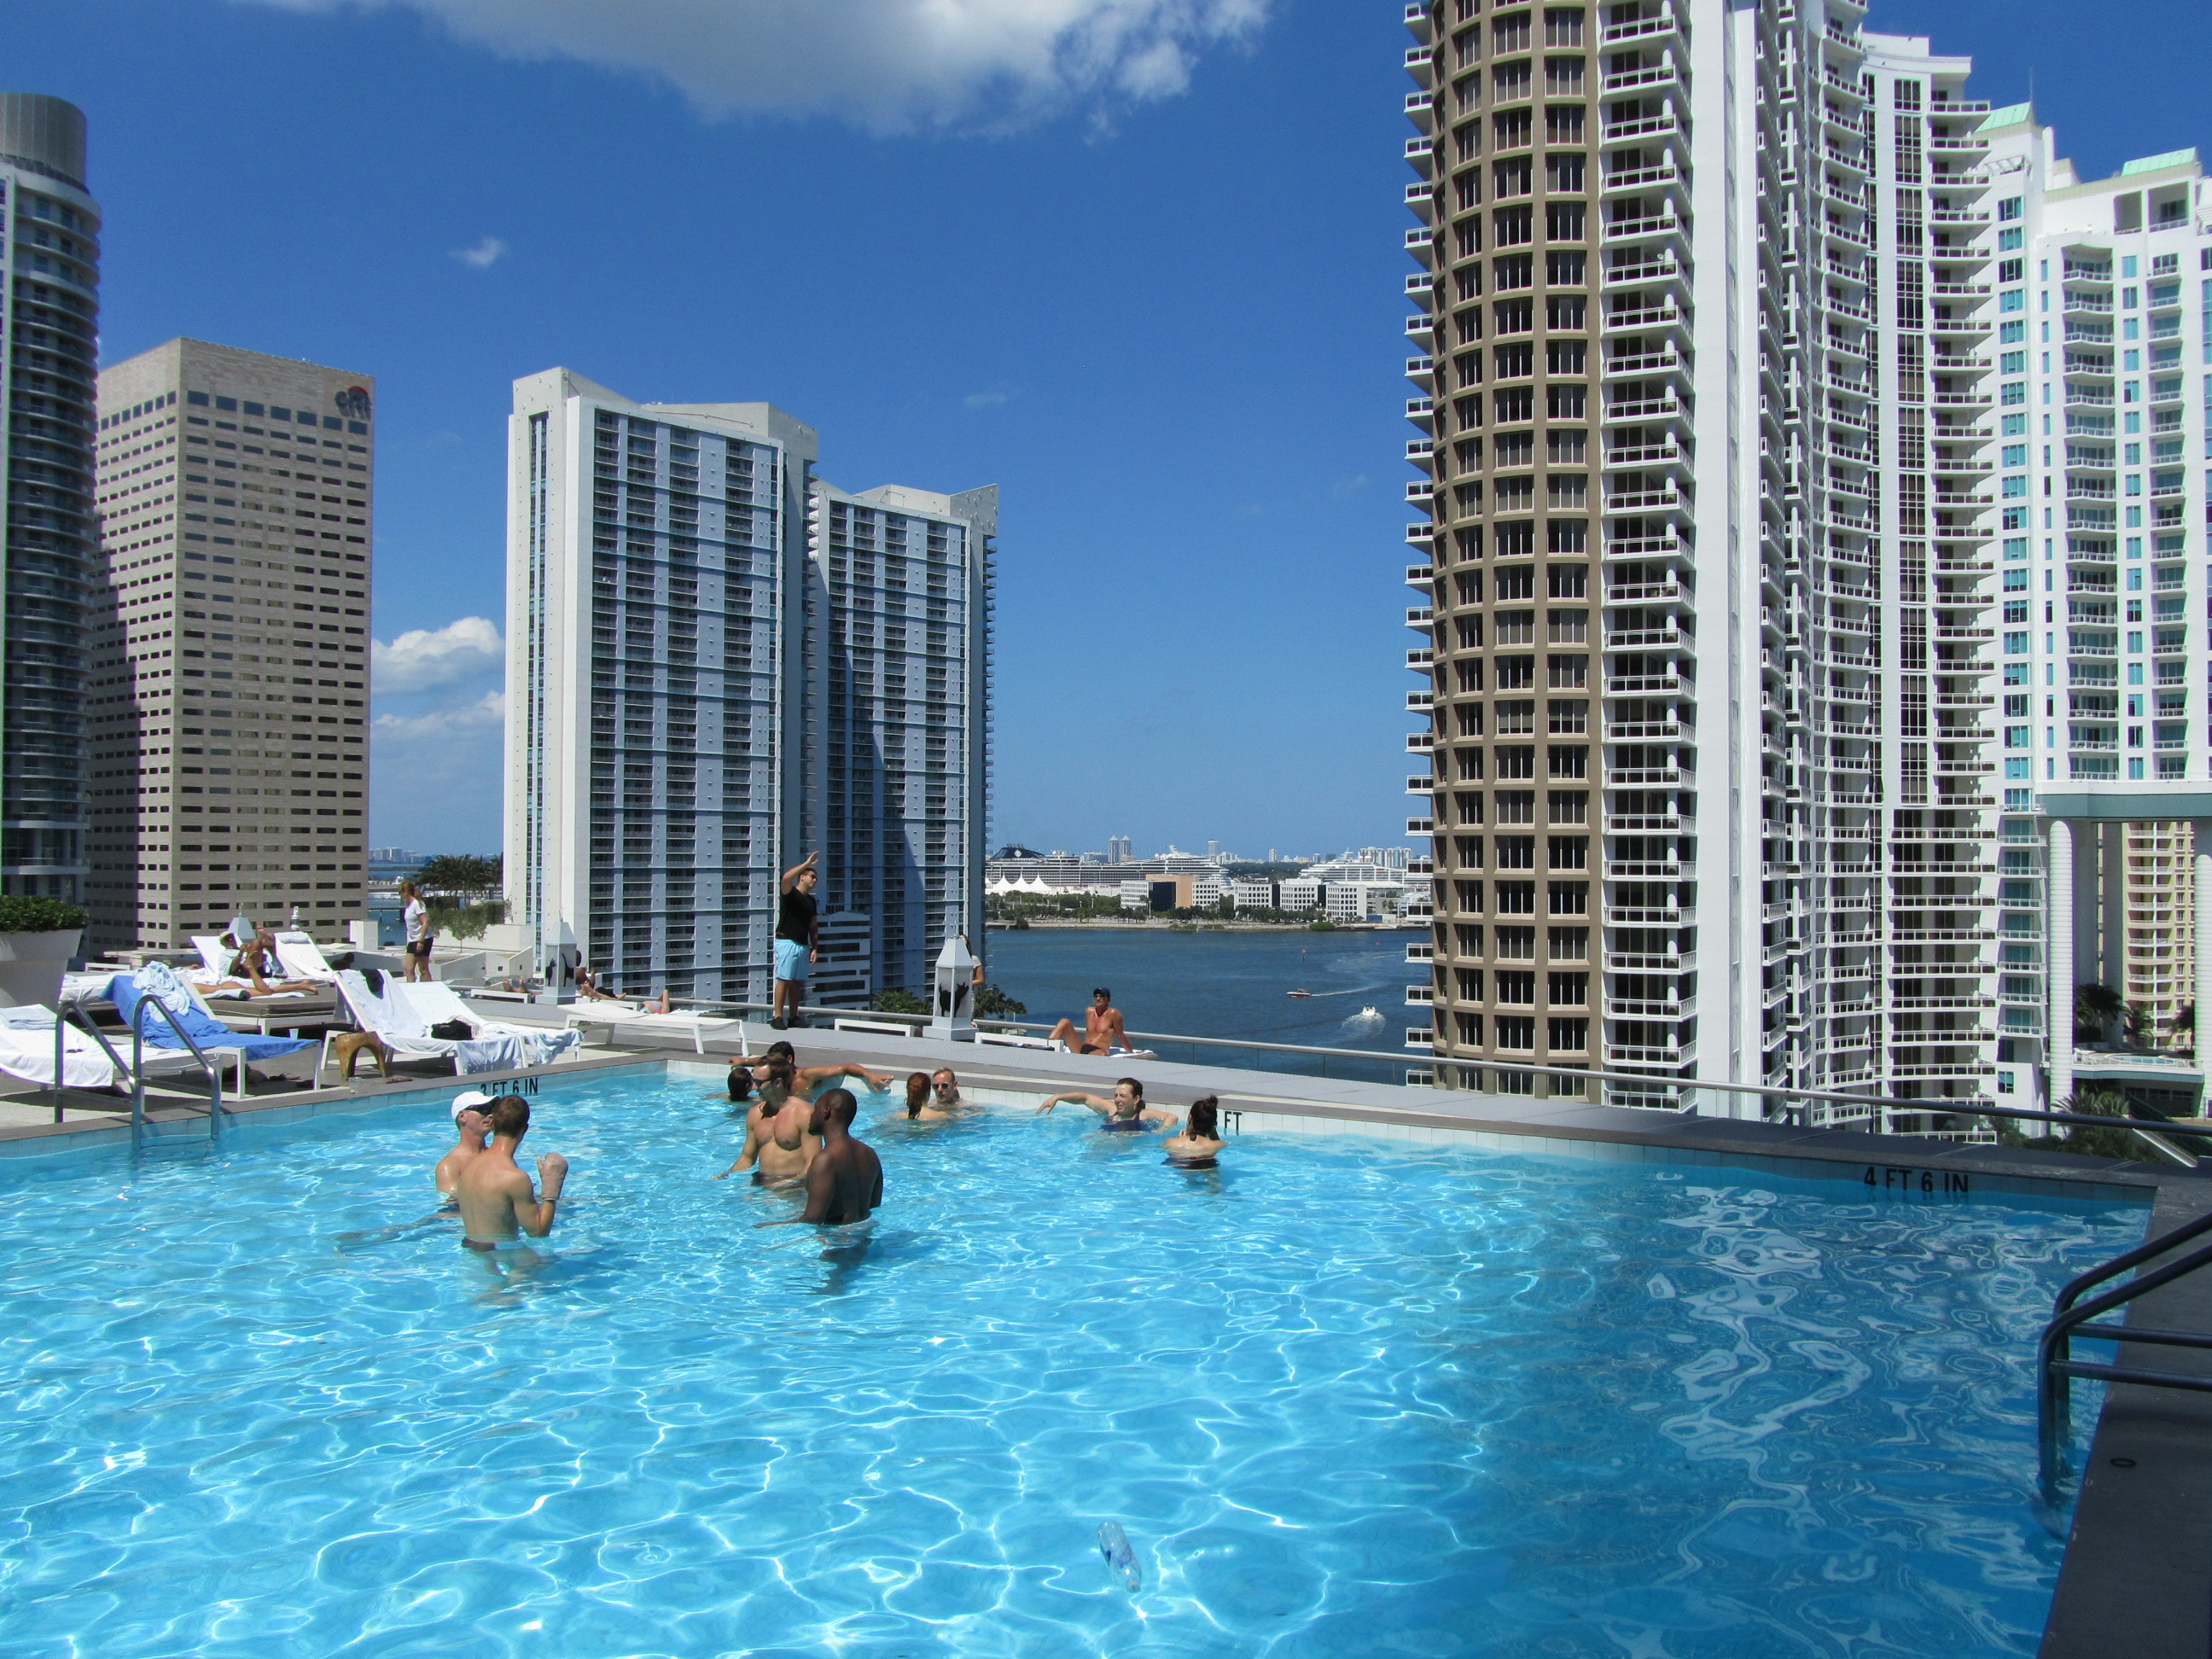 hotels for miami cruise port